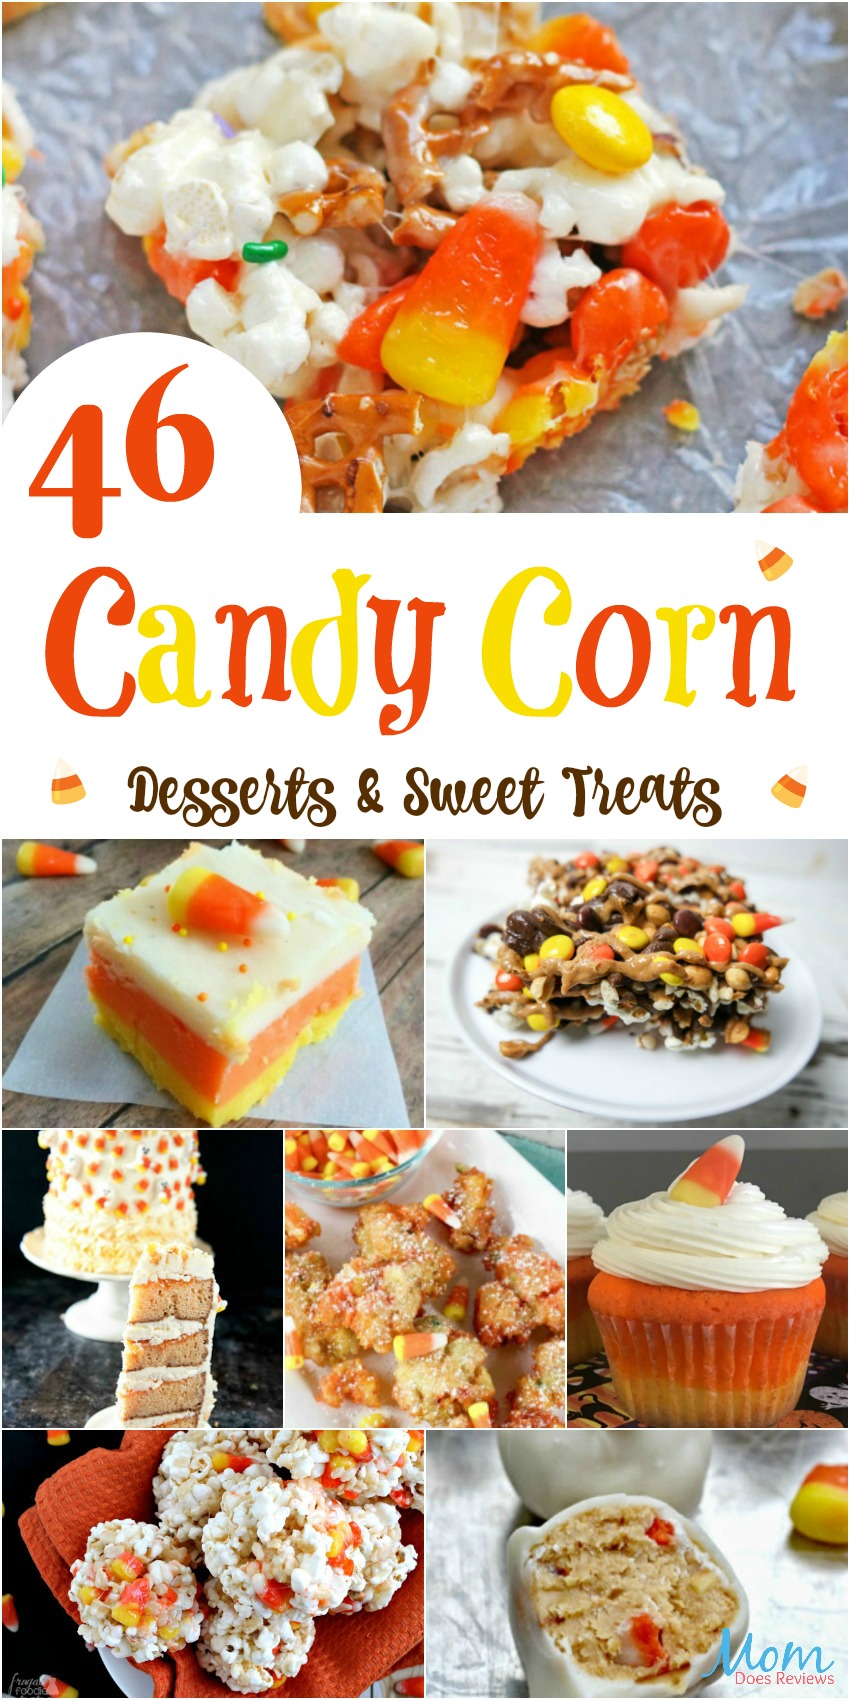 46 Candy Corn Desserts & Sweet Treats Perfect for Fall #recipes #sweets #halloween